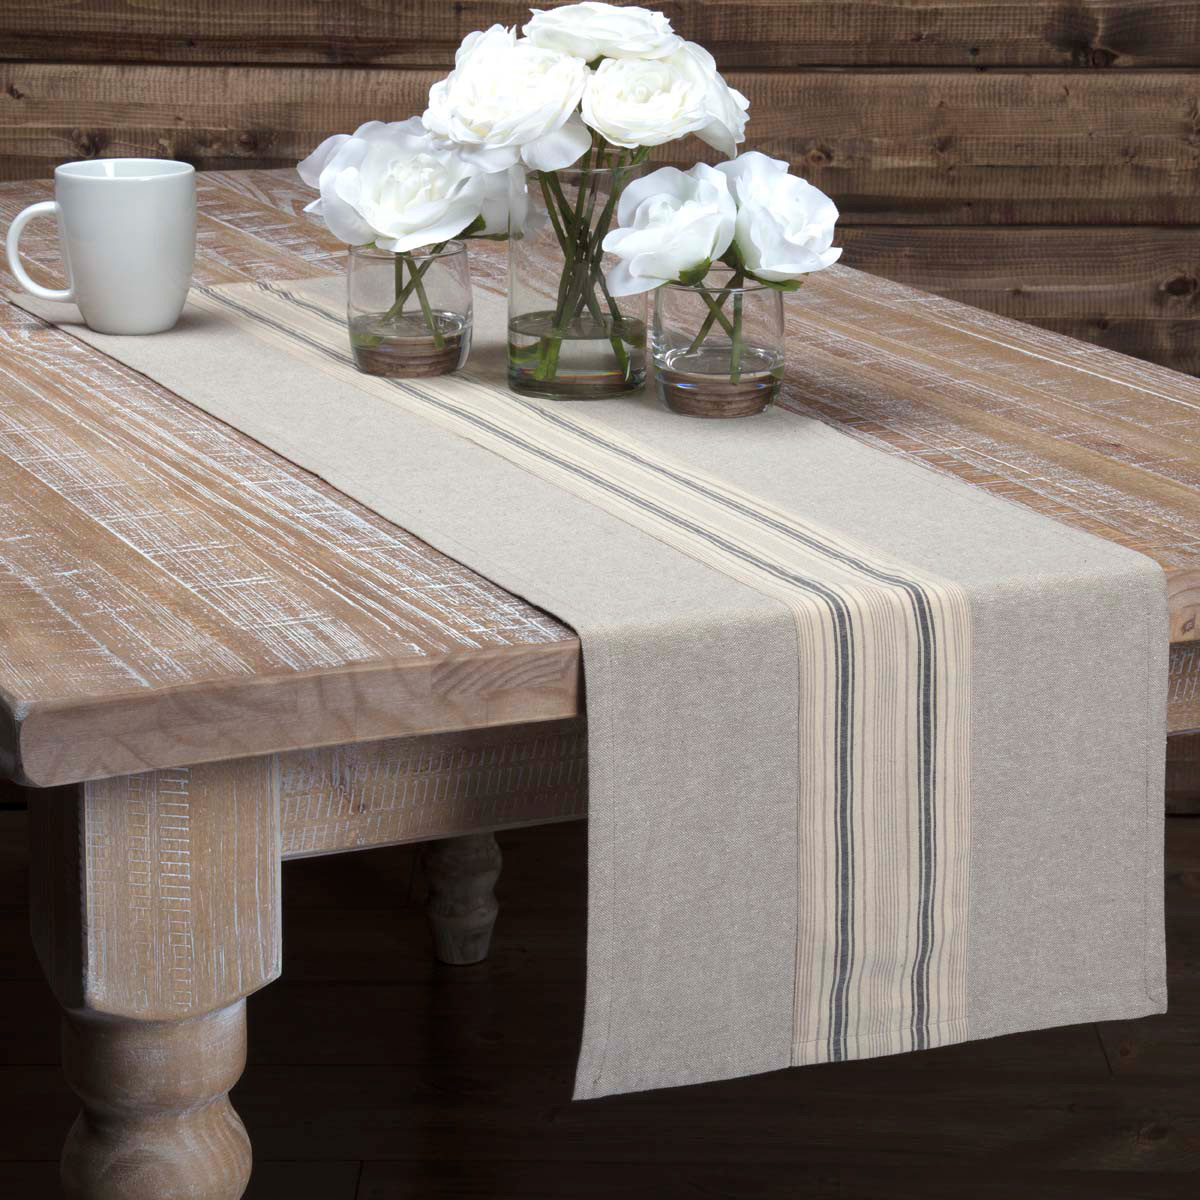 90 inch table runner rustic